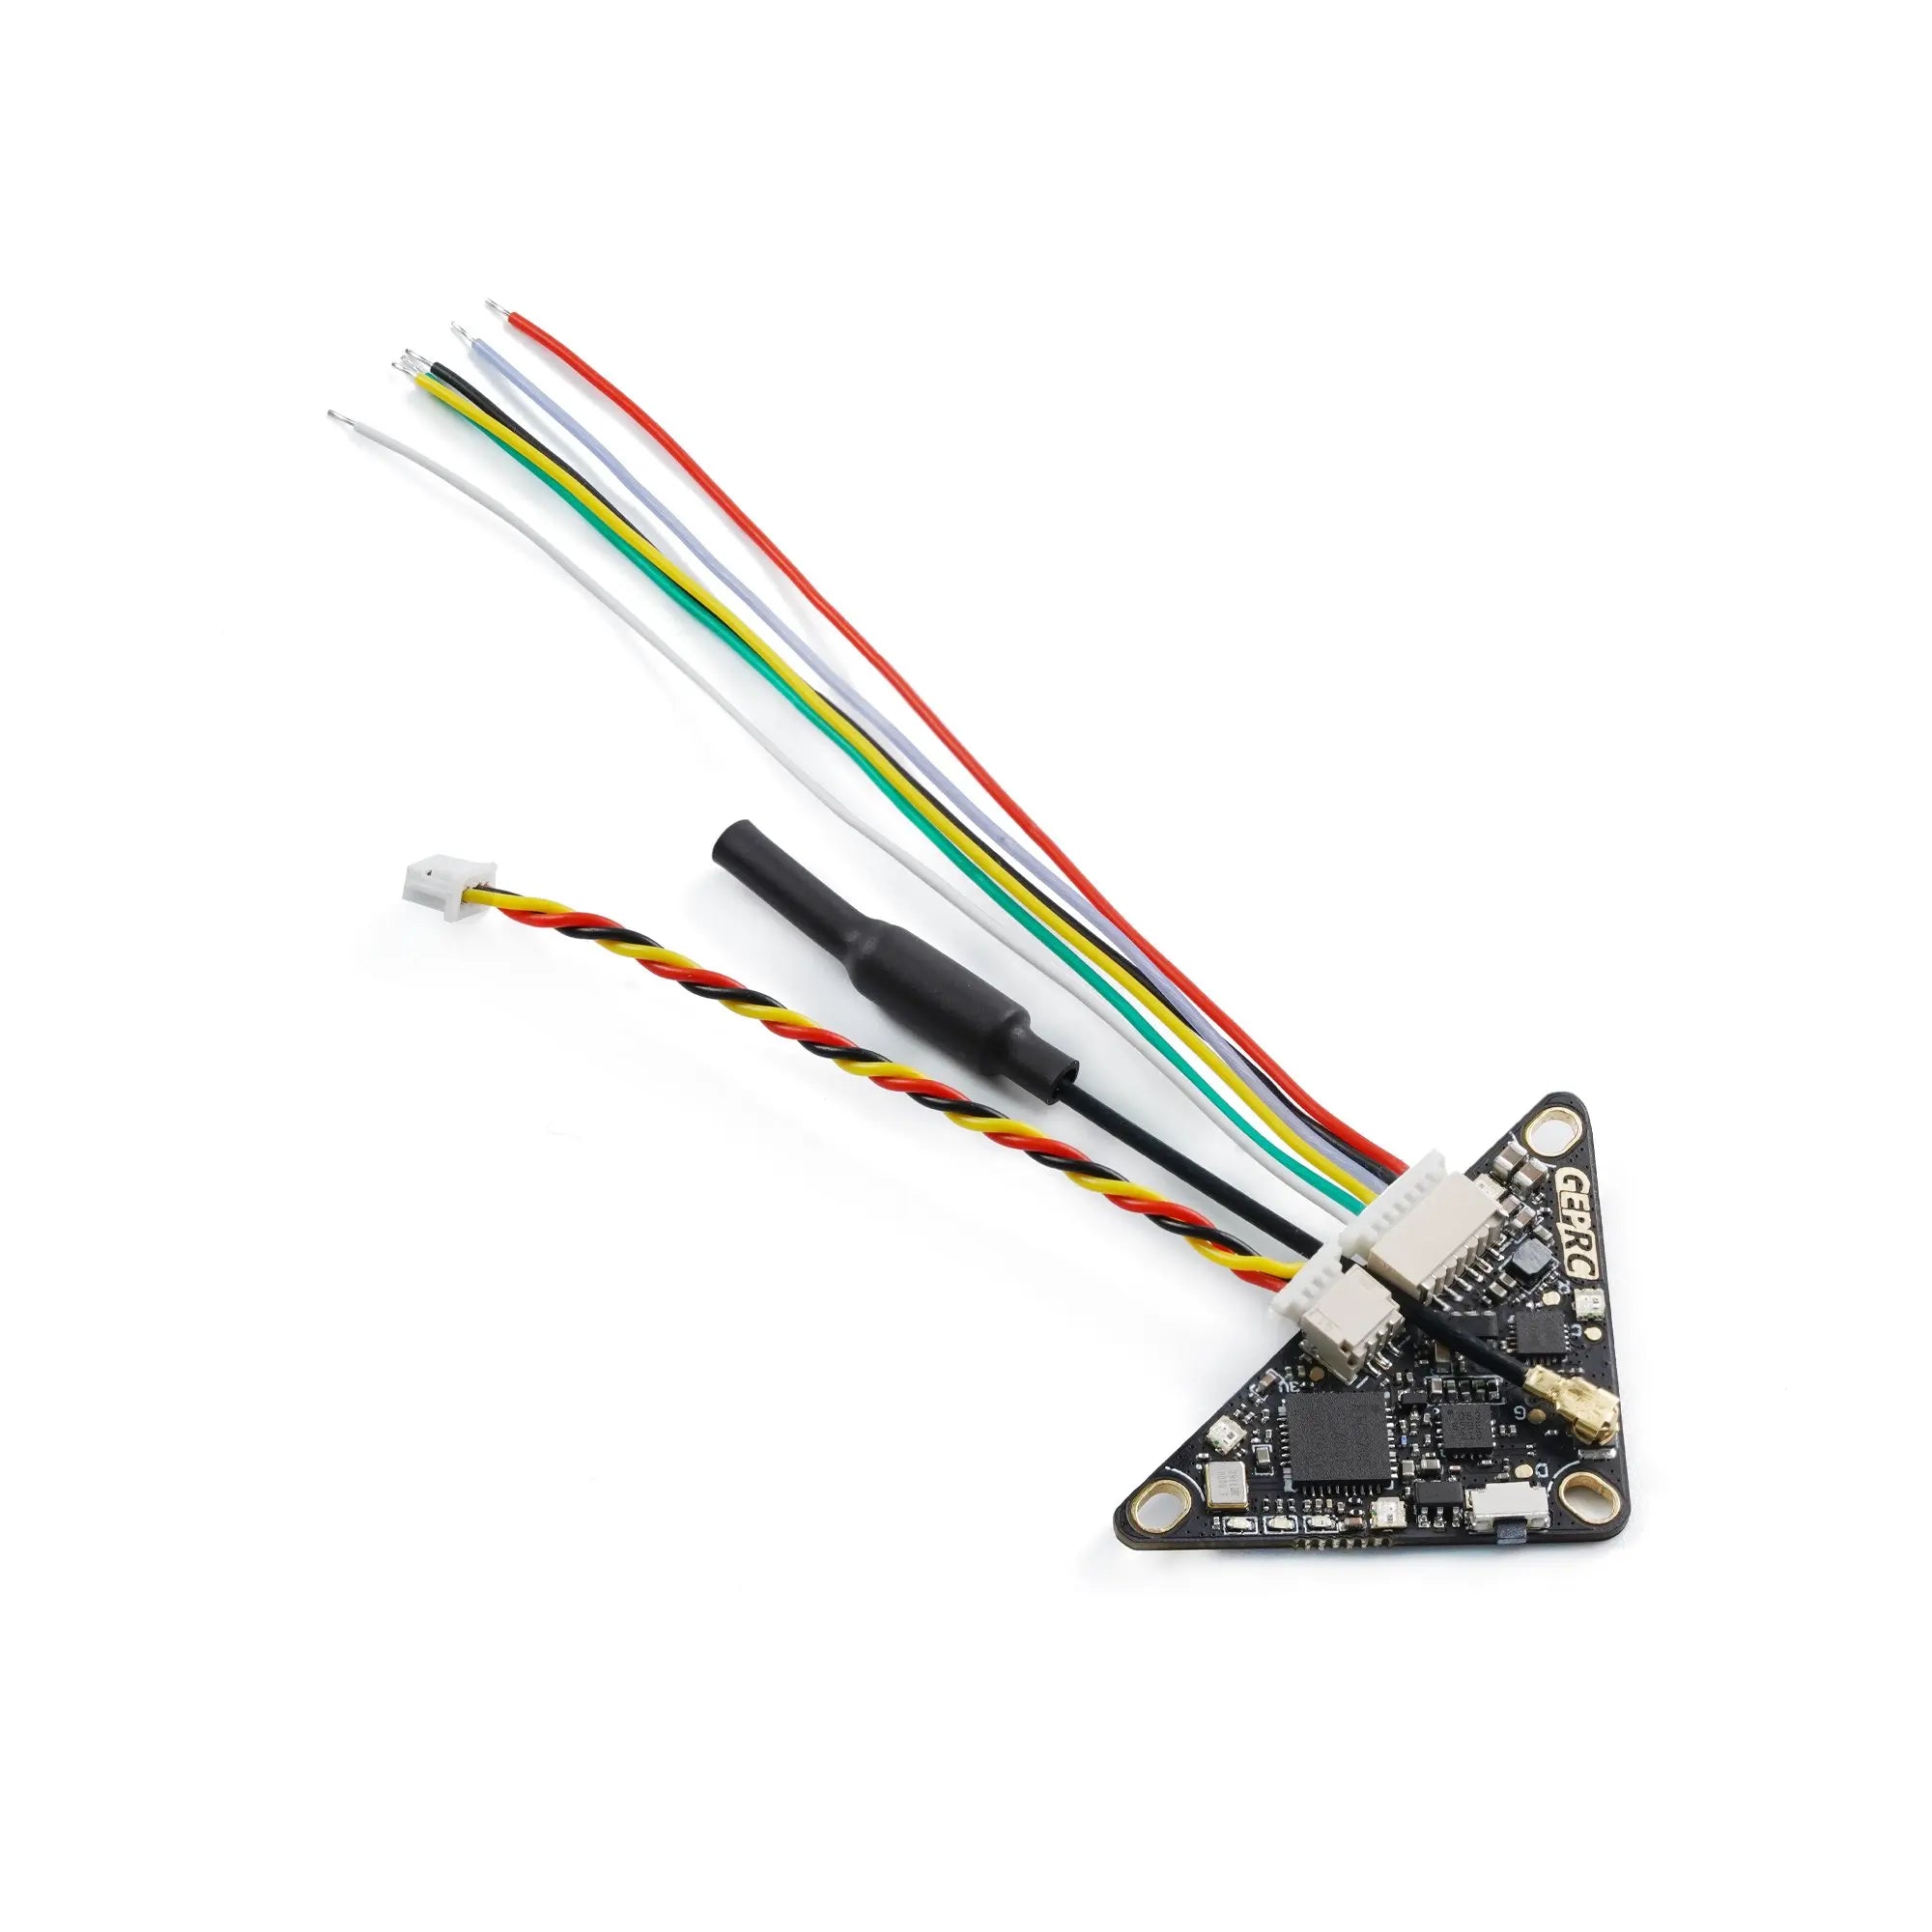 GEPRC RAD Whoop 5.8G VTX, the transmission signal is stable,good heat dissipation, OSD fast parameter tuning